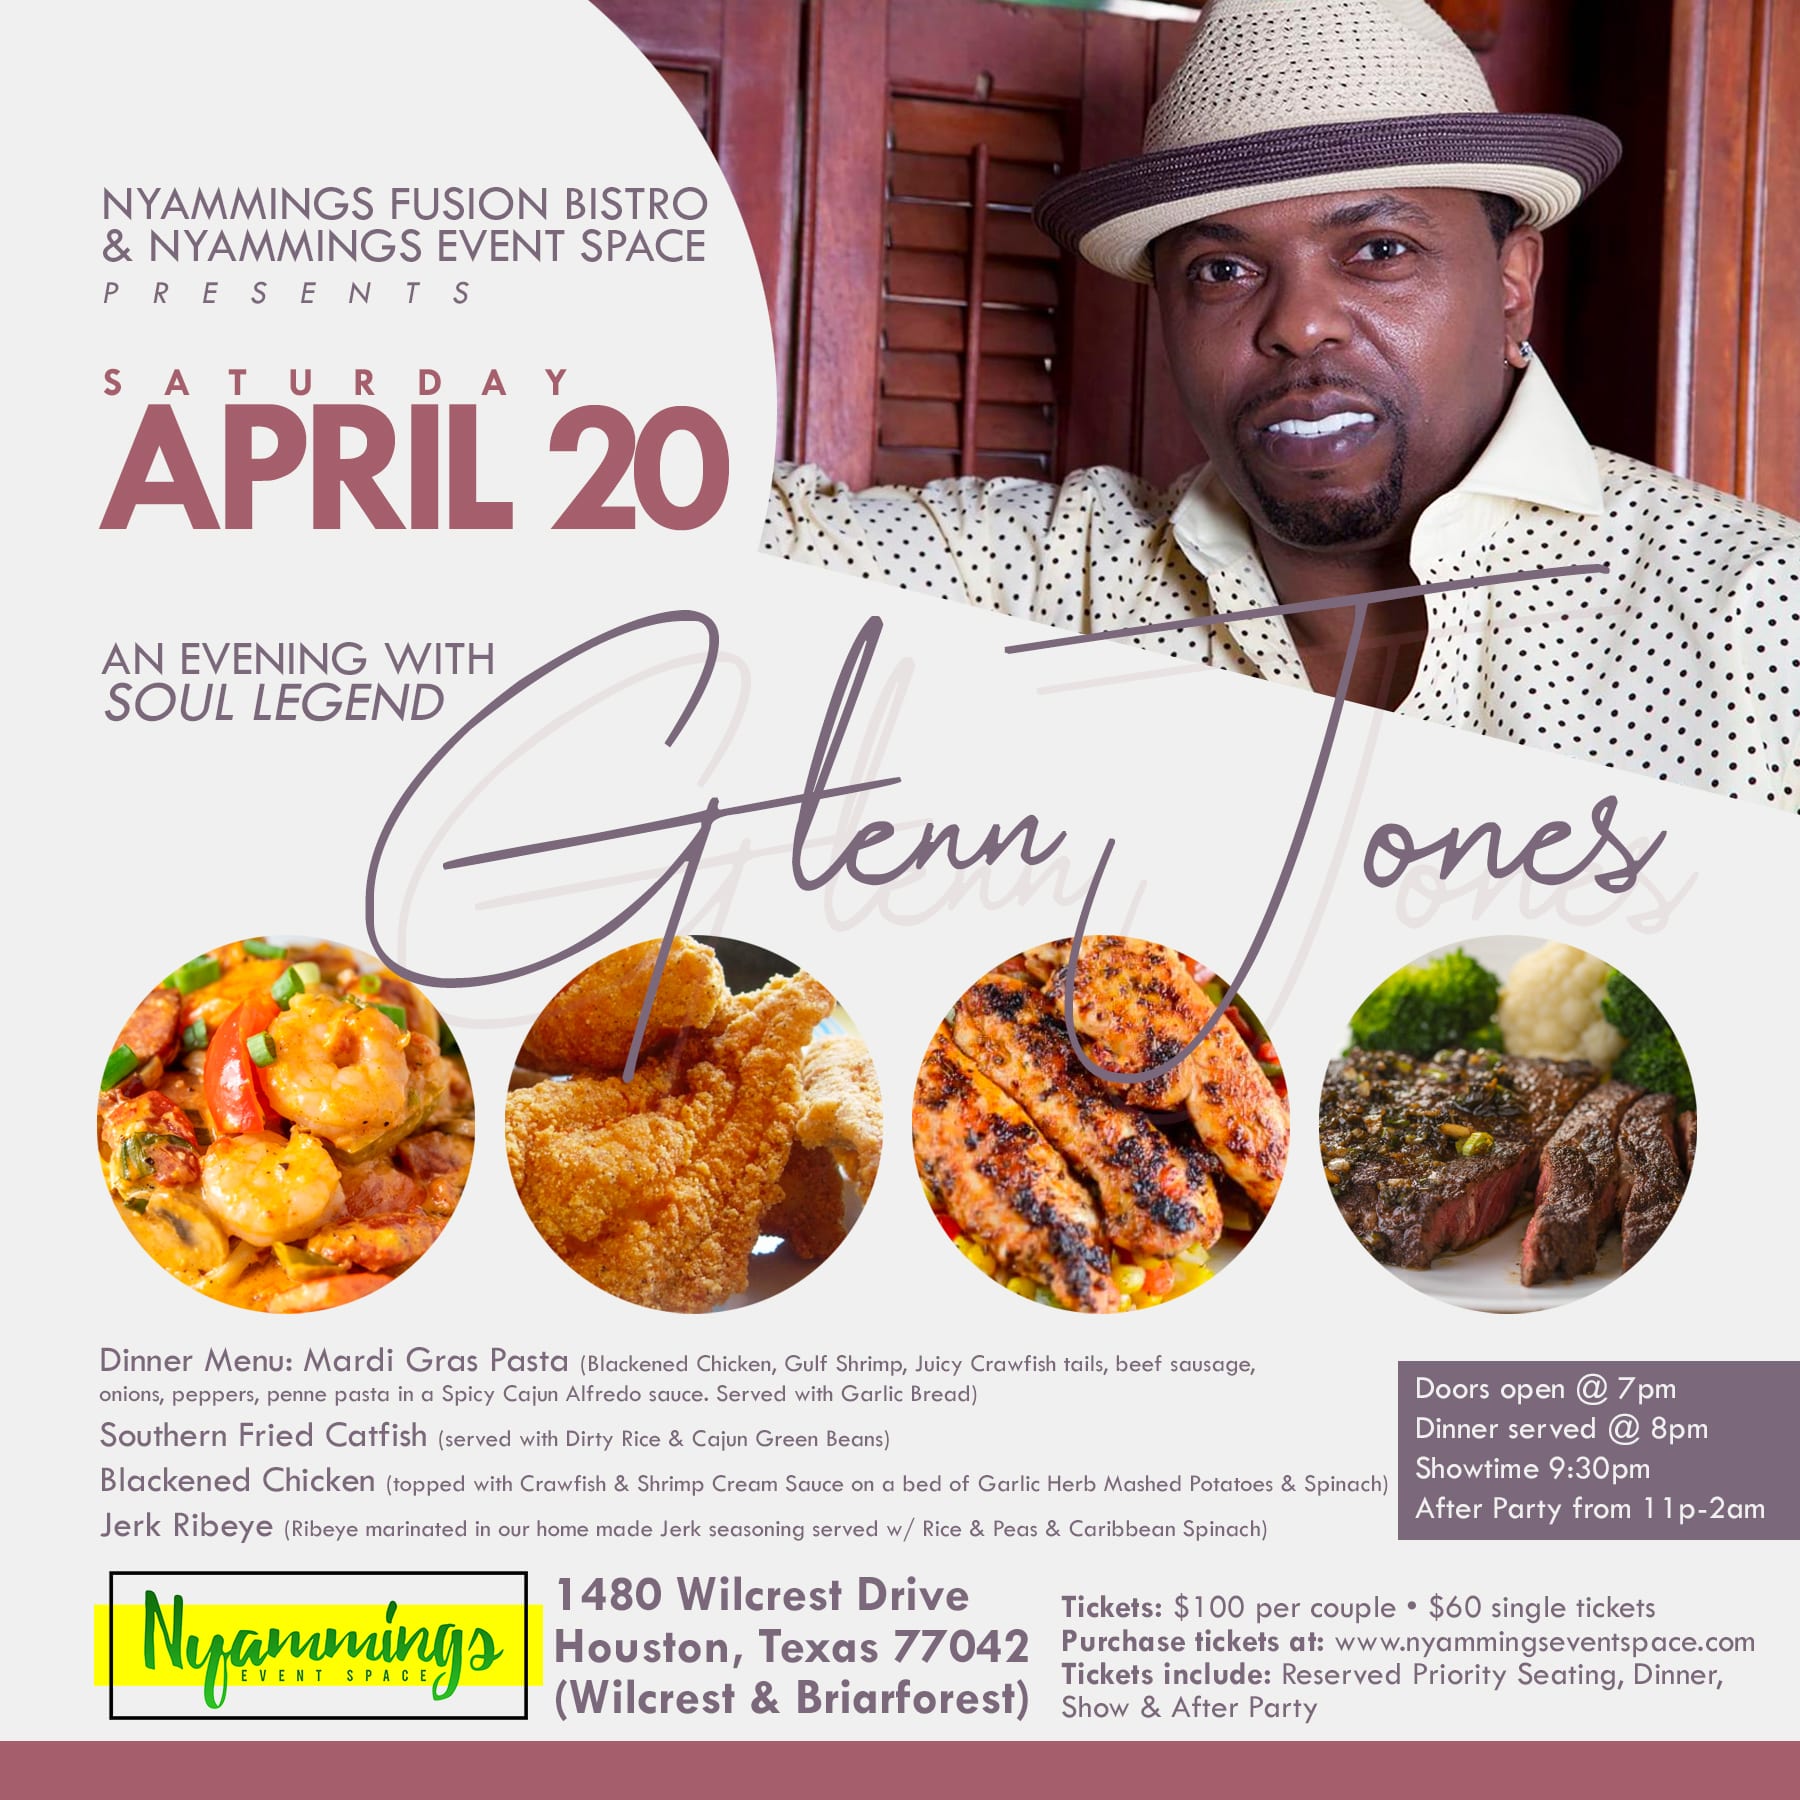 Nyammings Fusion Bistro & Nyammings Event Space presents An Intimate Evening with Old School R&B Legend Glenn Jones | Saturday April 20, 2019